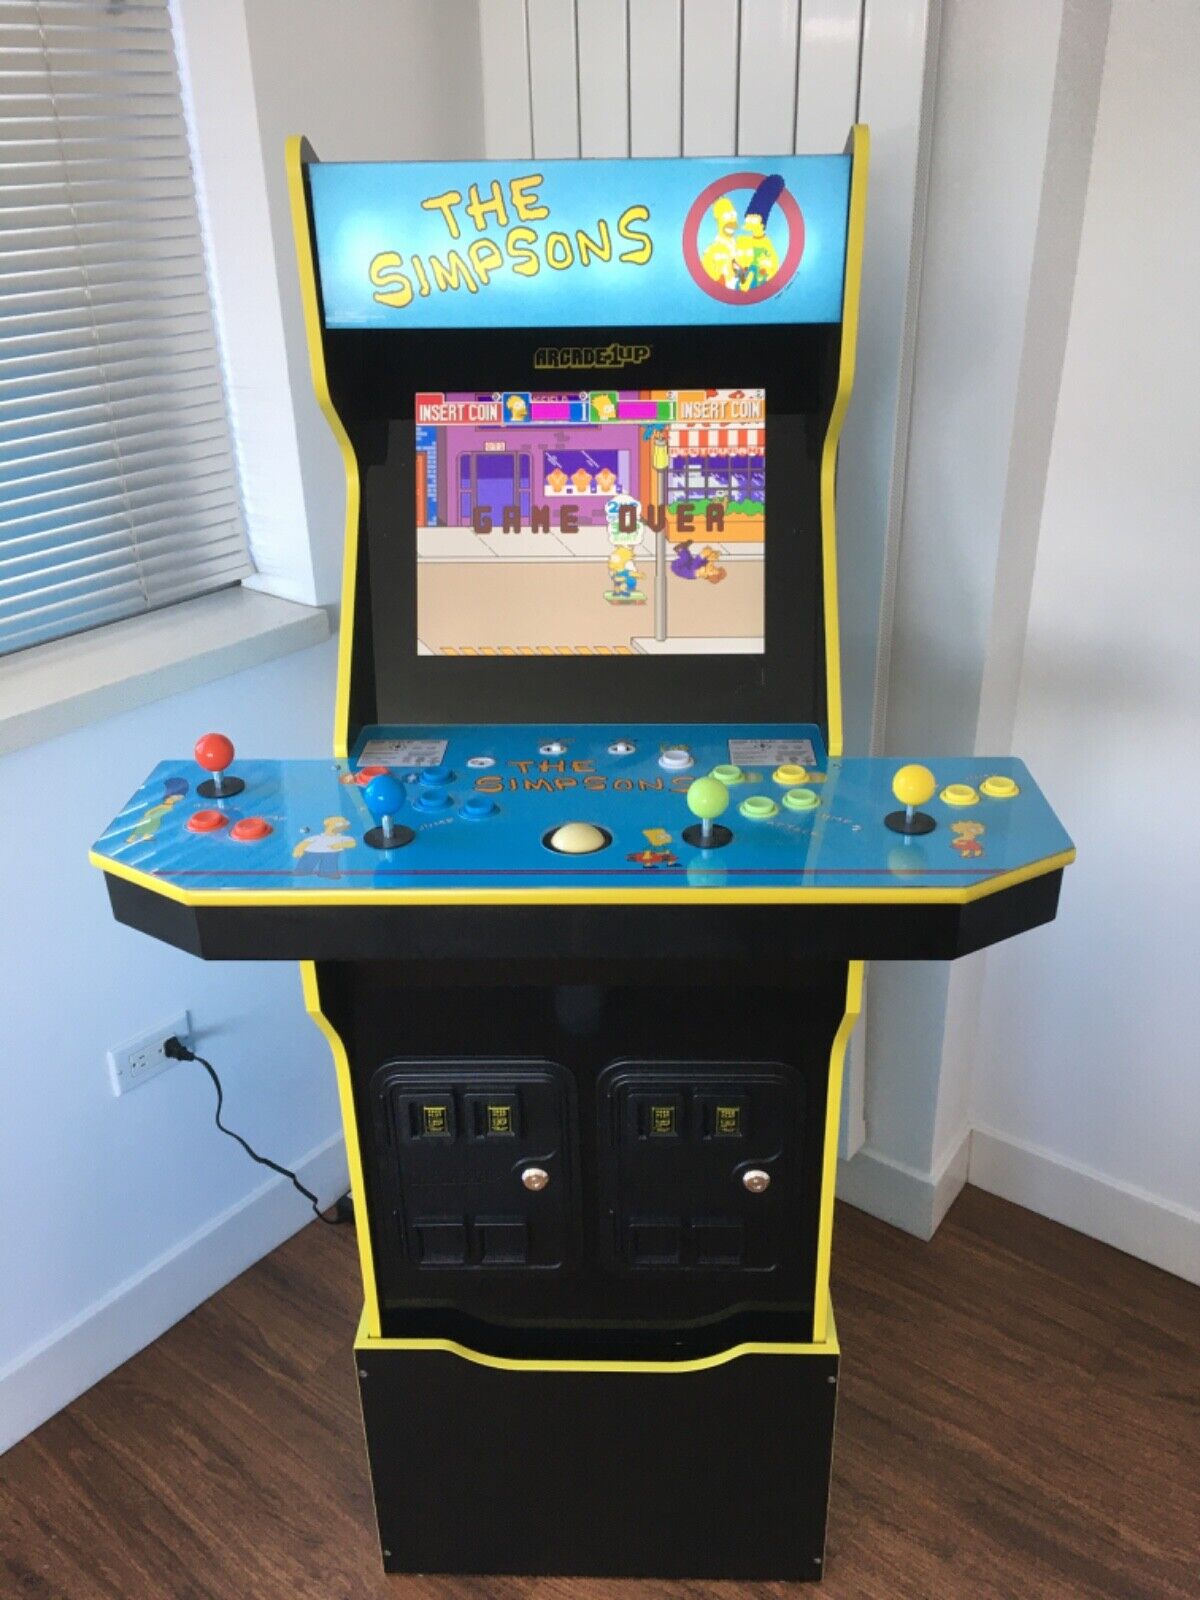 Arcade1up The Simpsons Arcade Game With Riser